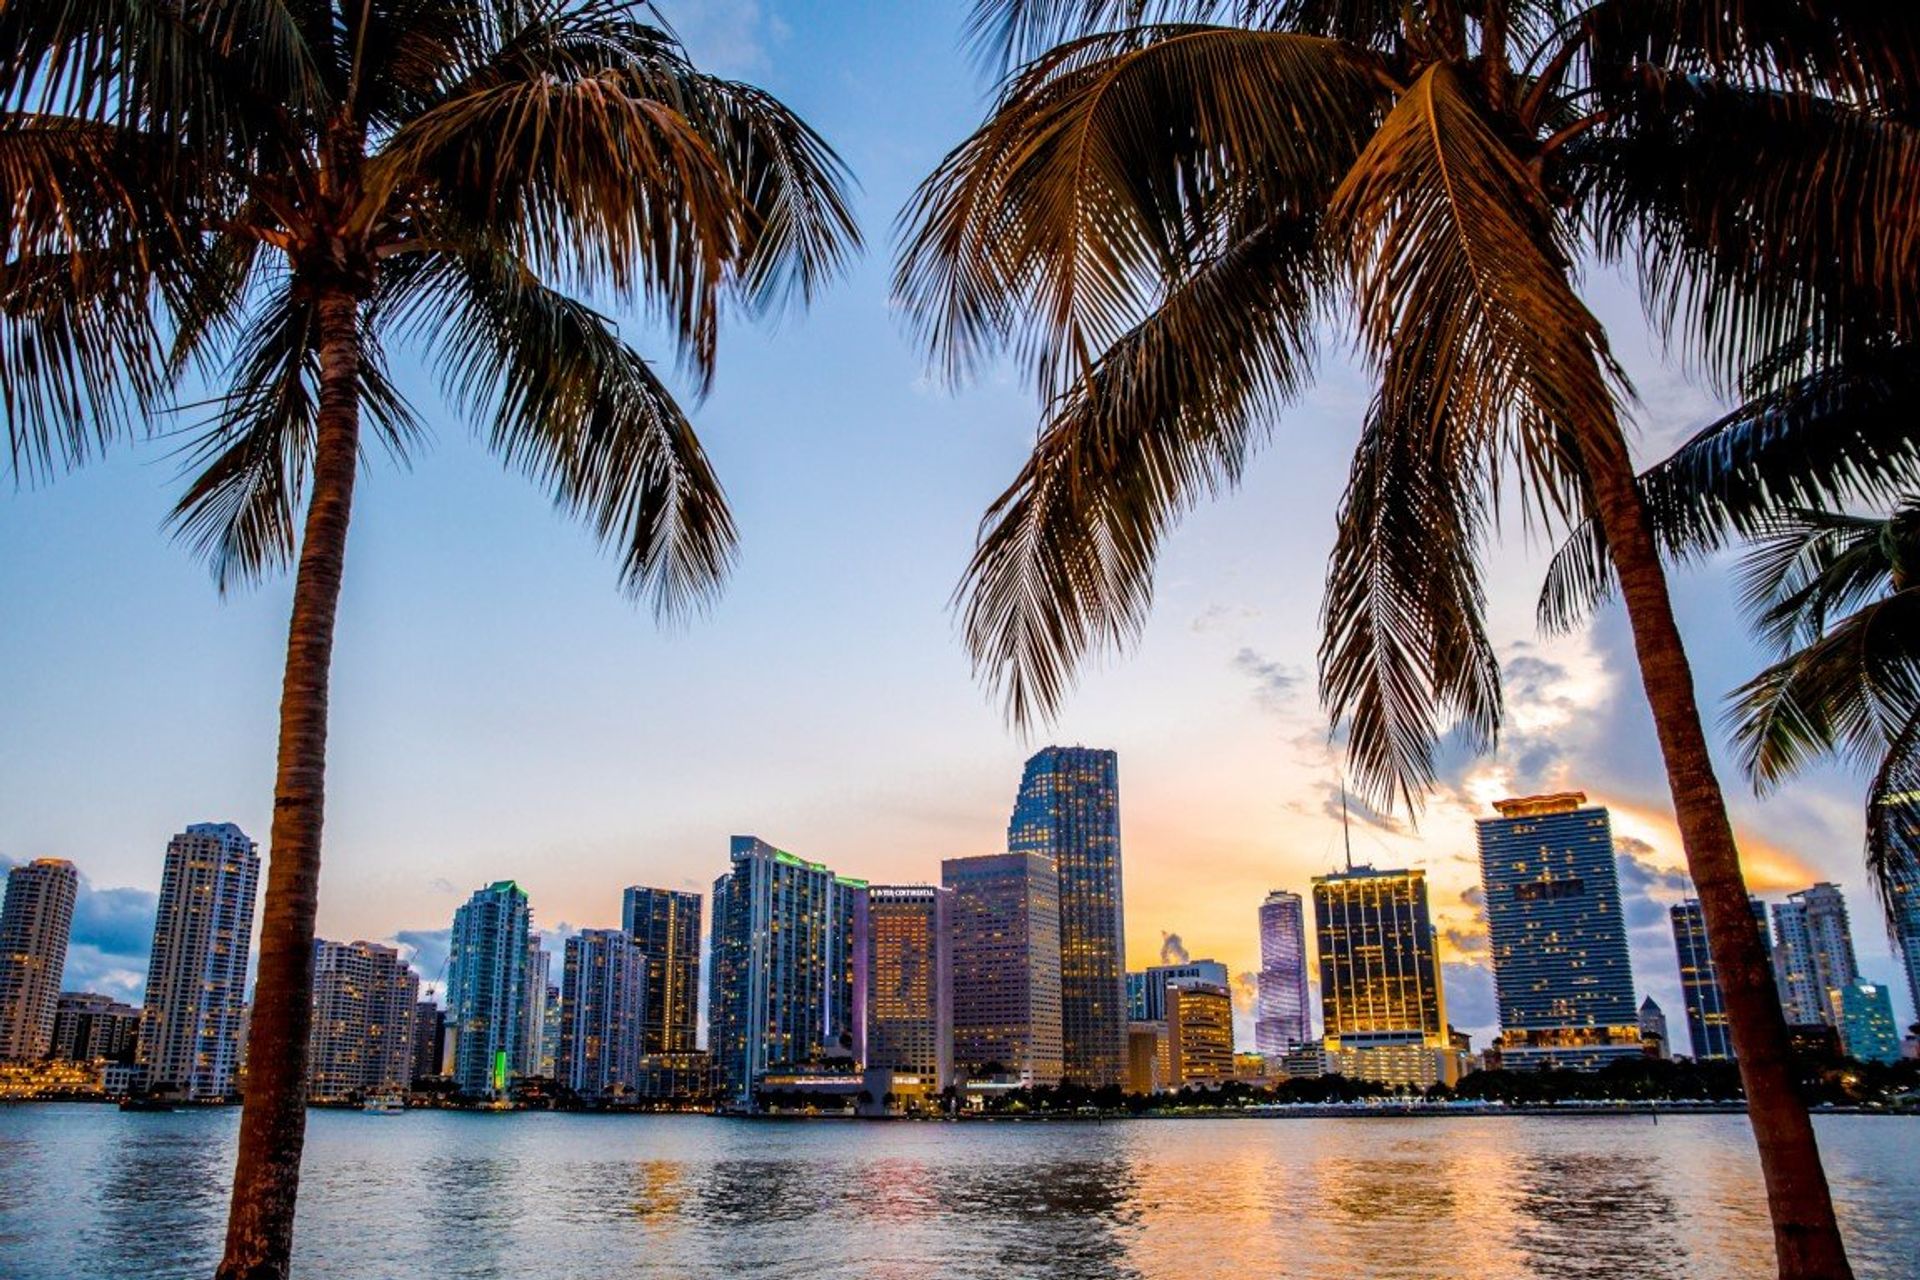 Enjoy a lively holiday in Miami, the city that never sleeps